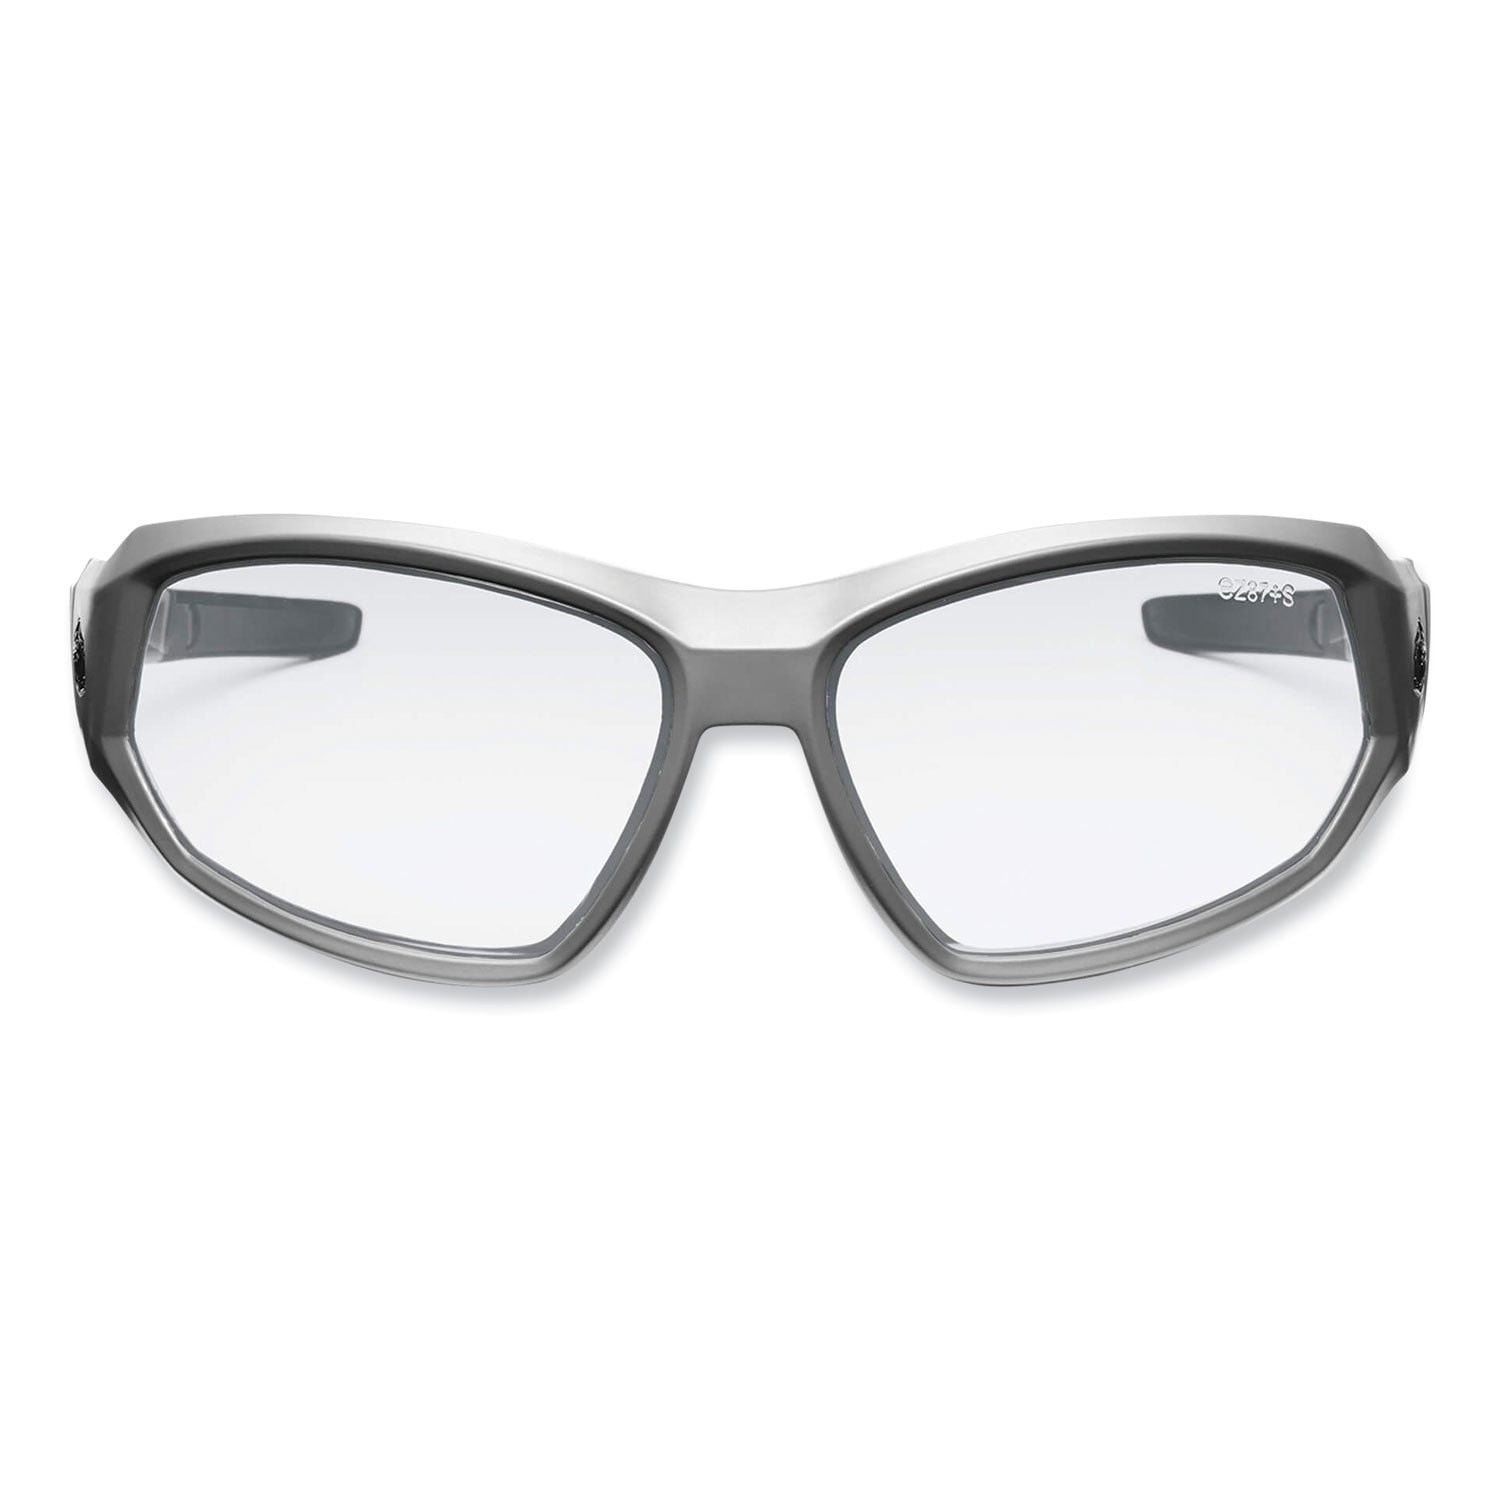 skullerz-loki-safety-glasses-goggles-matte-gray-nylon-impact-frame-anti-fog-clear-polycarb-lens-ships-in-1-3-business-days_ego56103 - 1